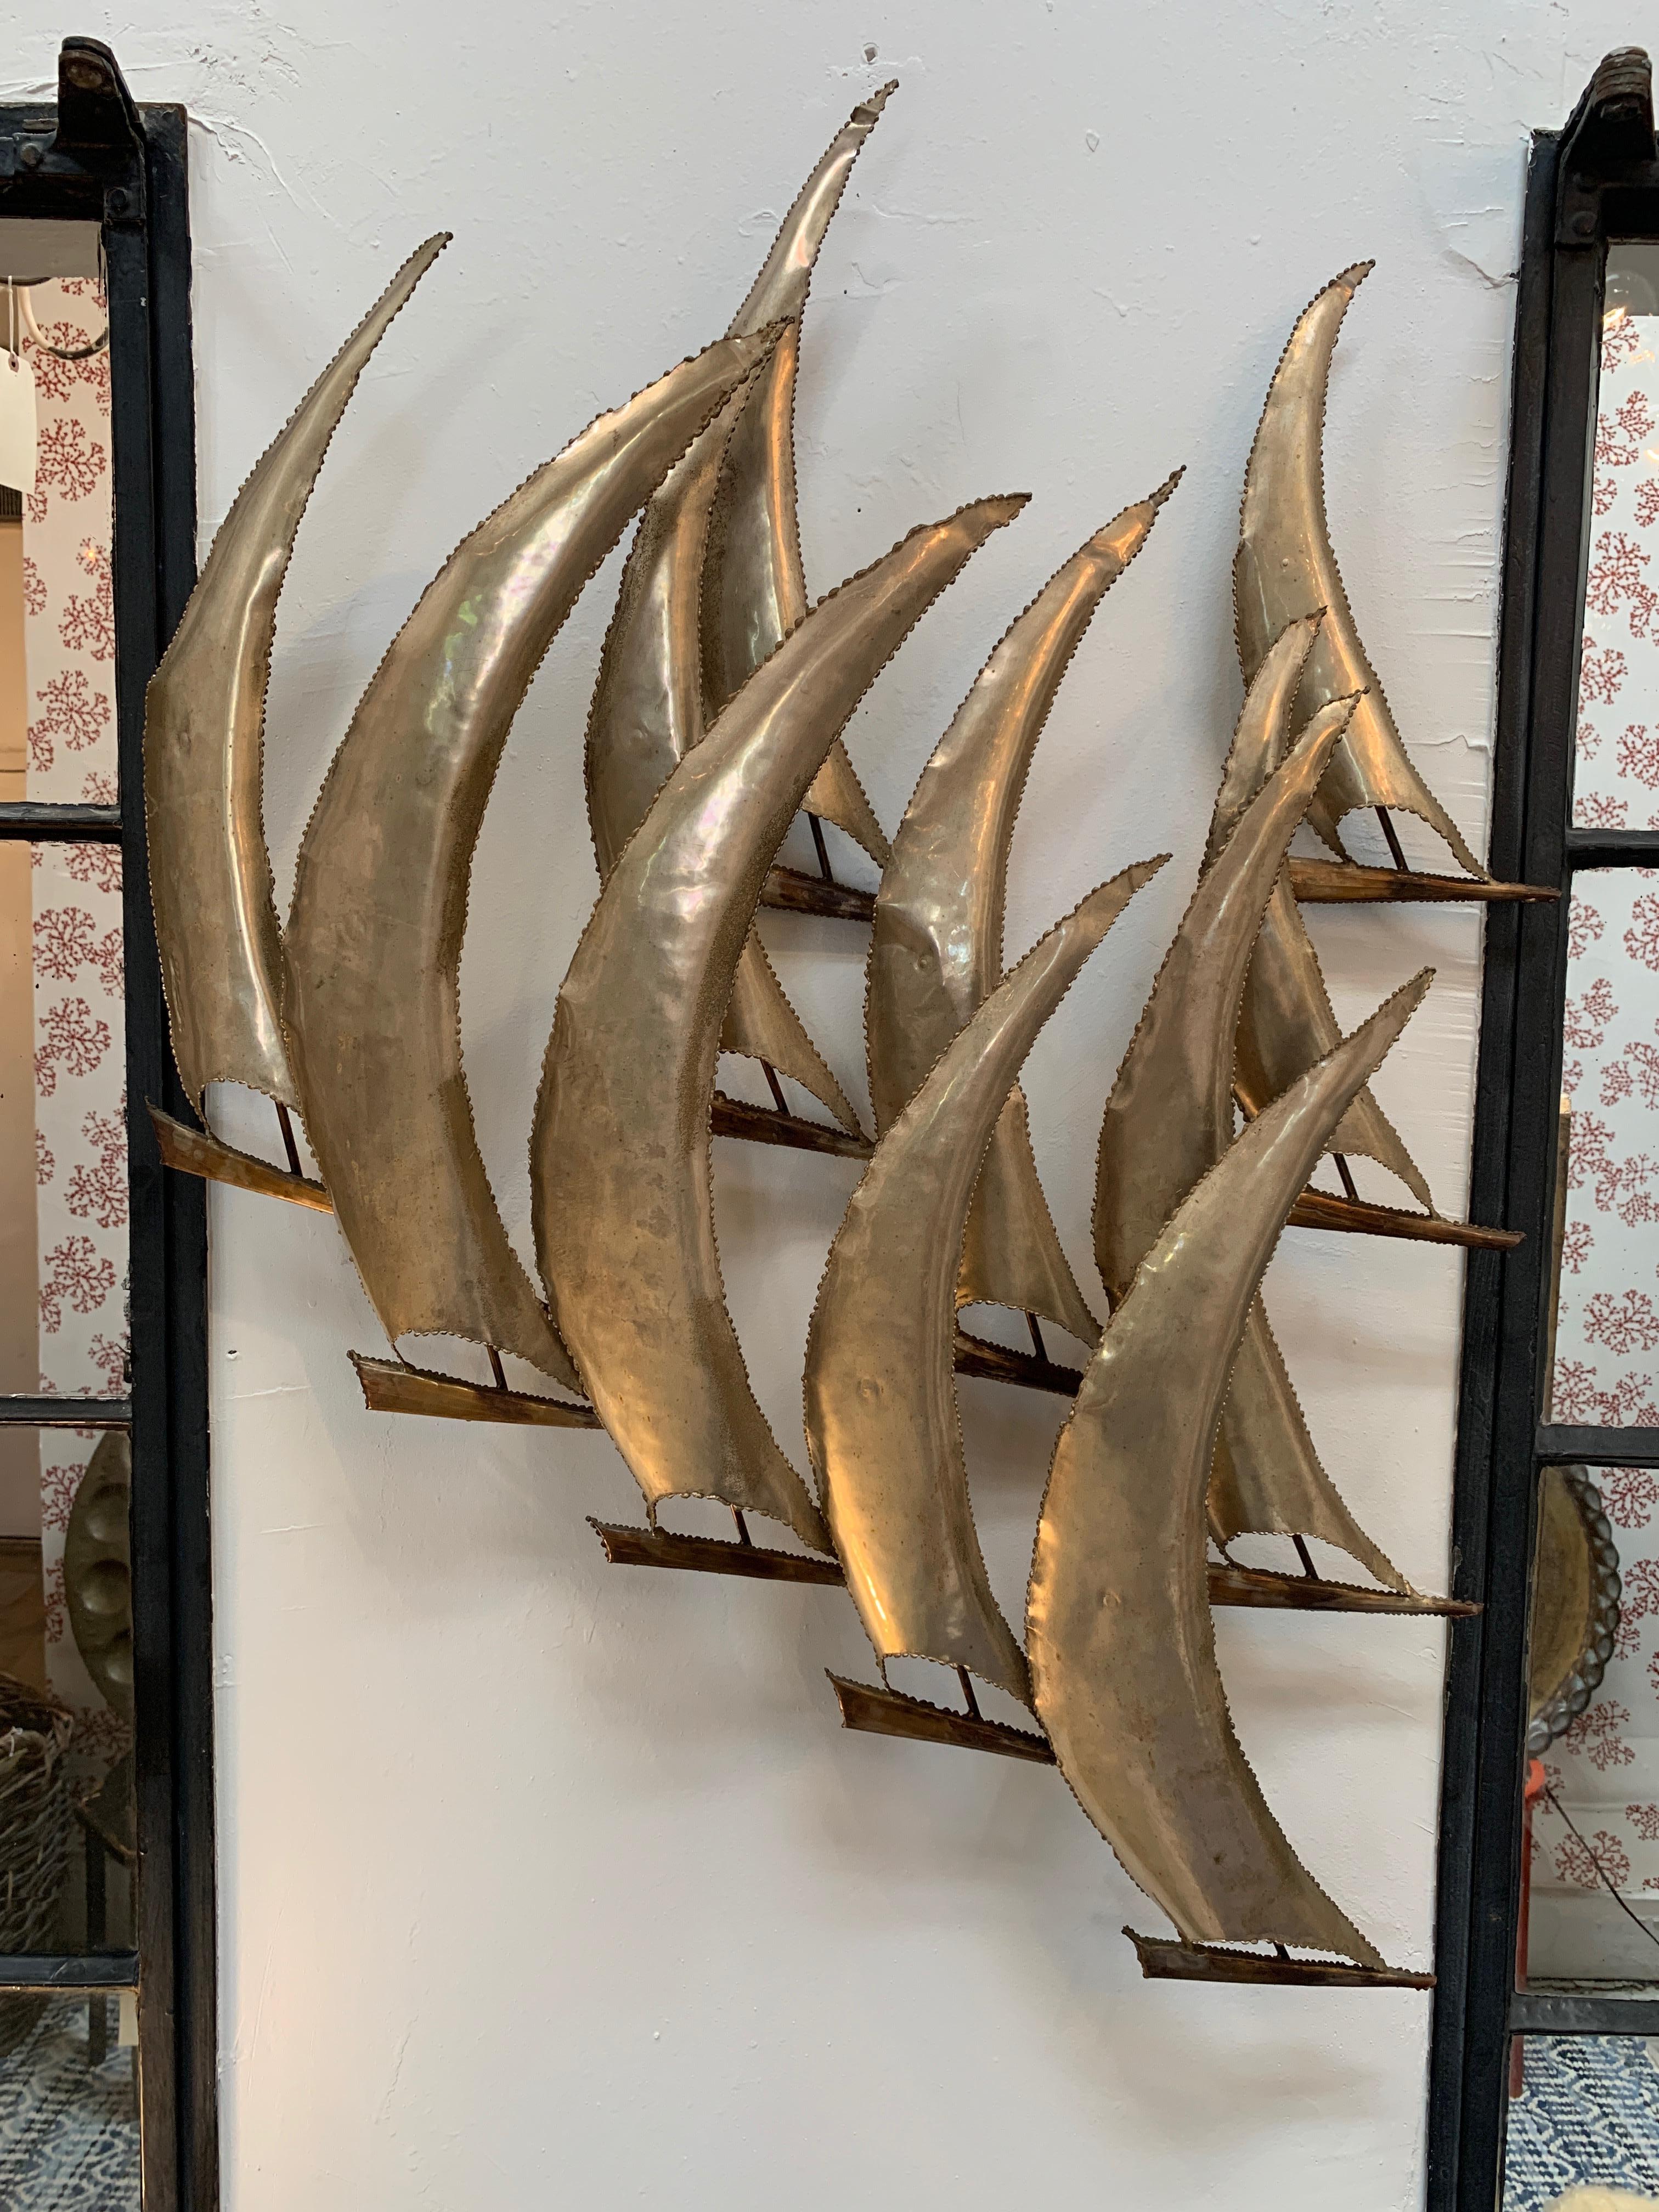 Midcentury torch cut metal wall art welded in copper and brass. Large piece in the style of Curtis Jere, 1960s-1970s. Artist unknown. Has a very nice patina, varying throughout. Light aging but excellent condition.